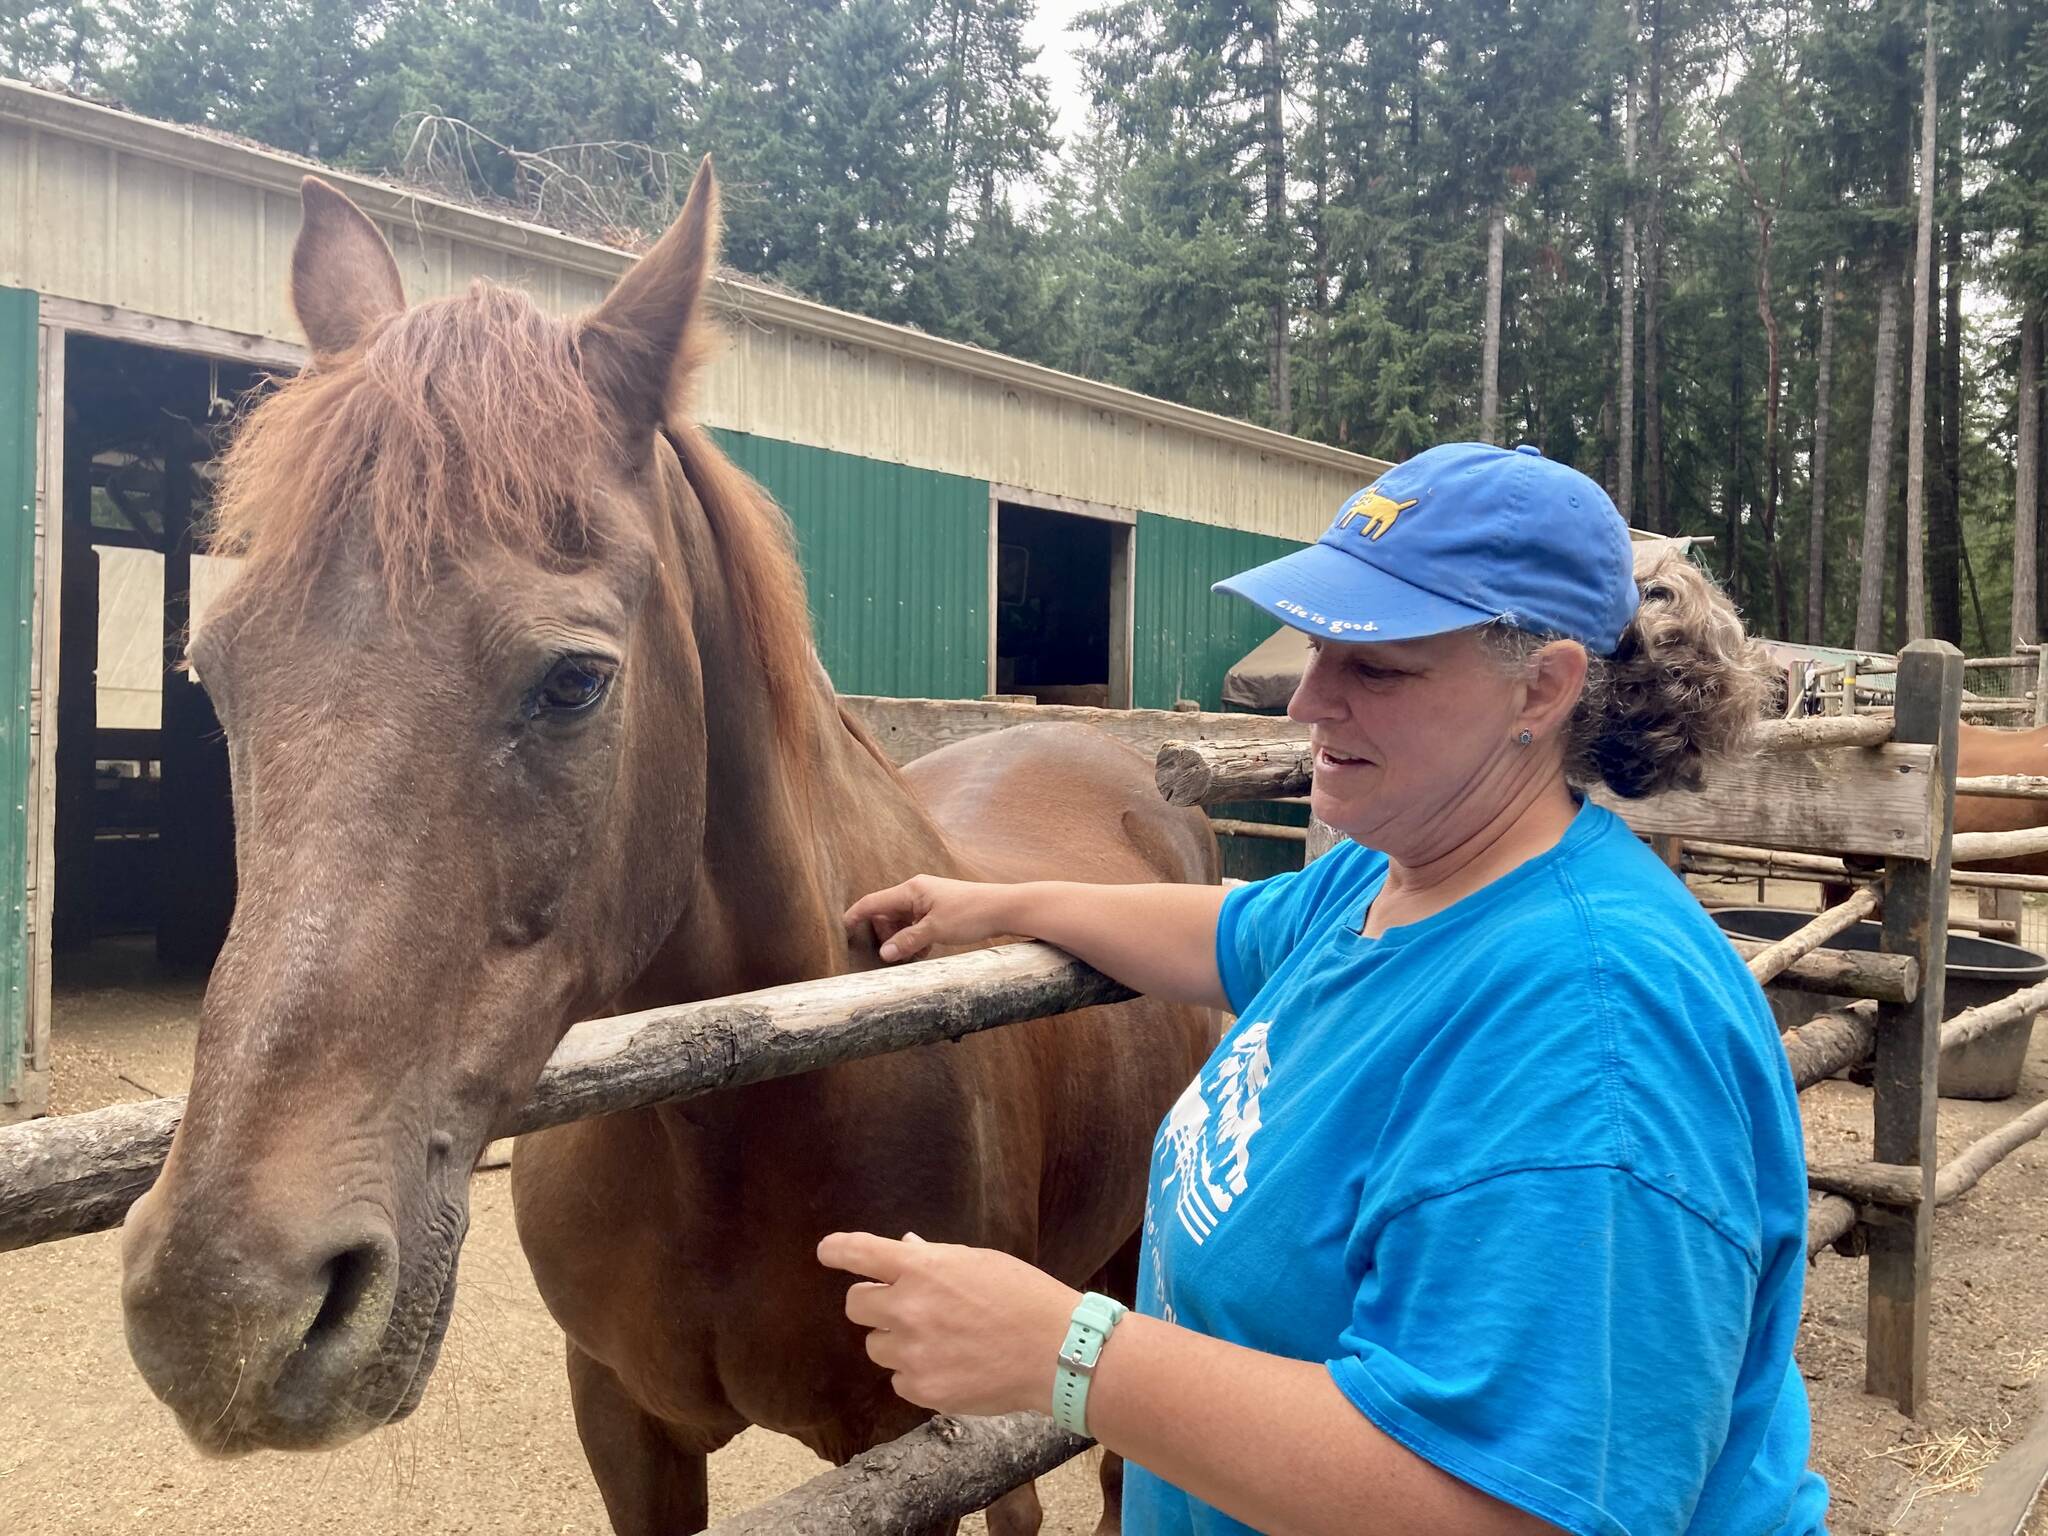 Director Tina Meekins says hi to one of the horses on site while its home is being raked. Elisha Meyer/Kitsap News Group